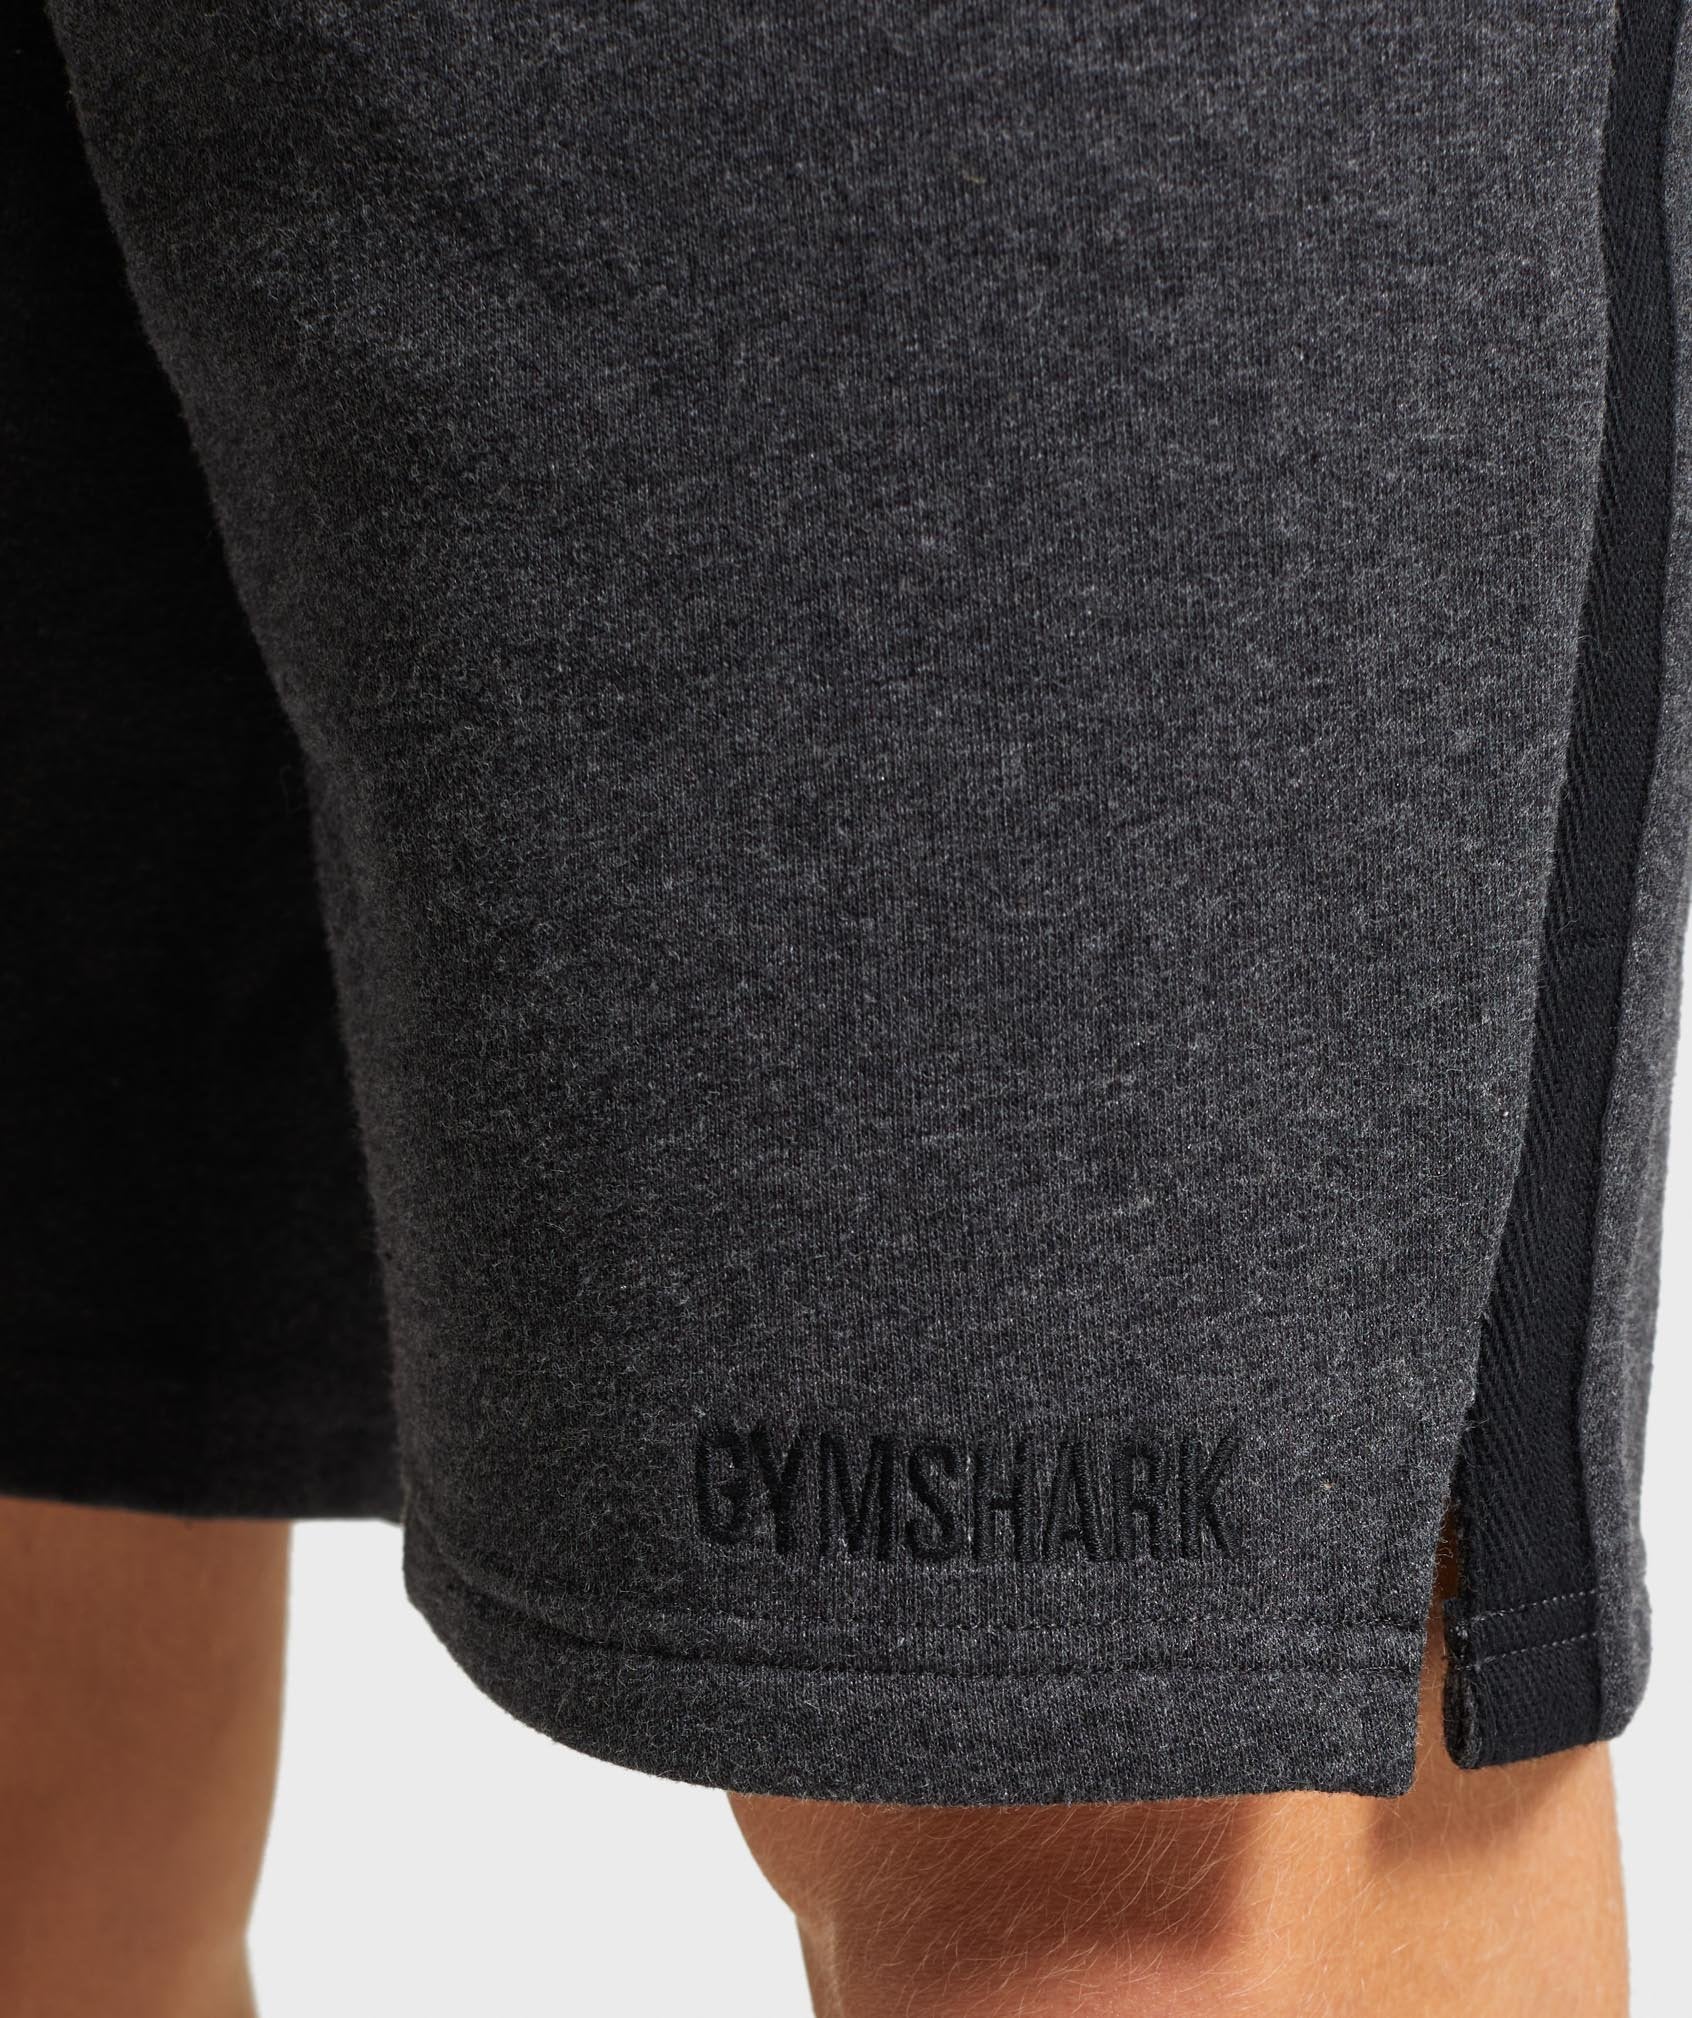 Compound Shorts in Black Marl - view 5